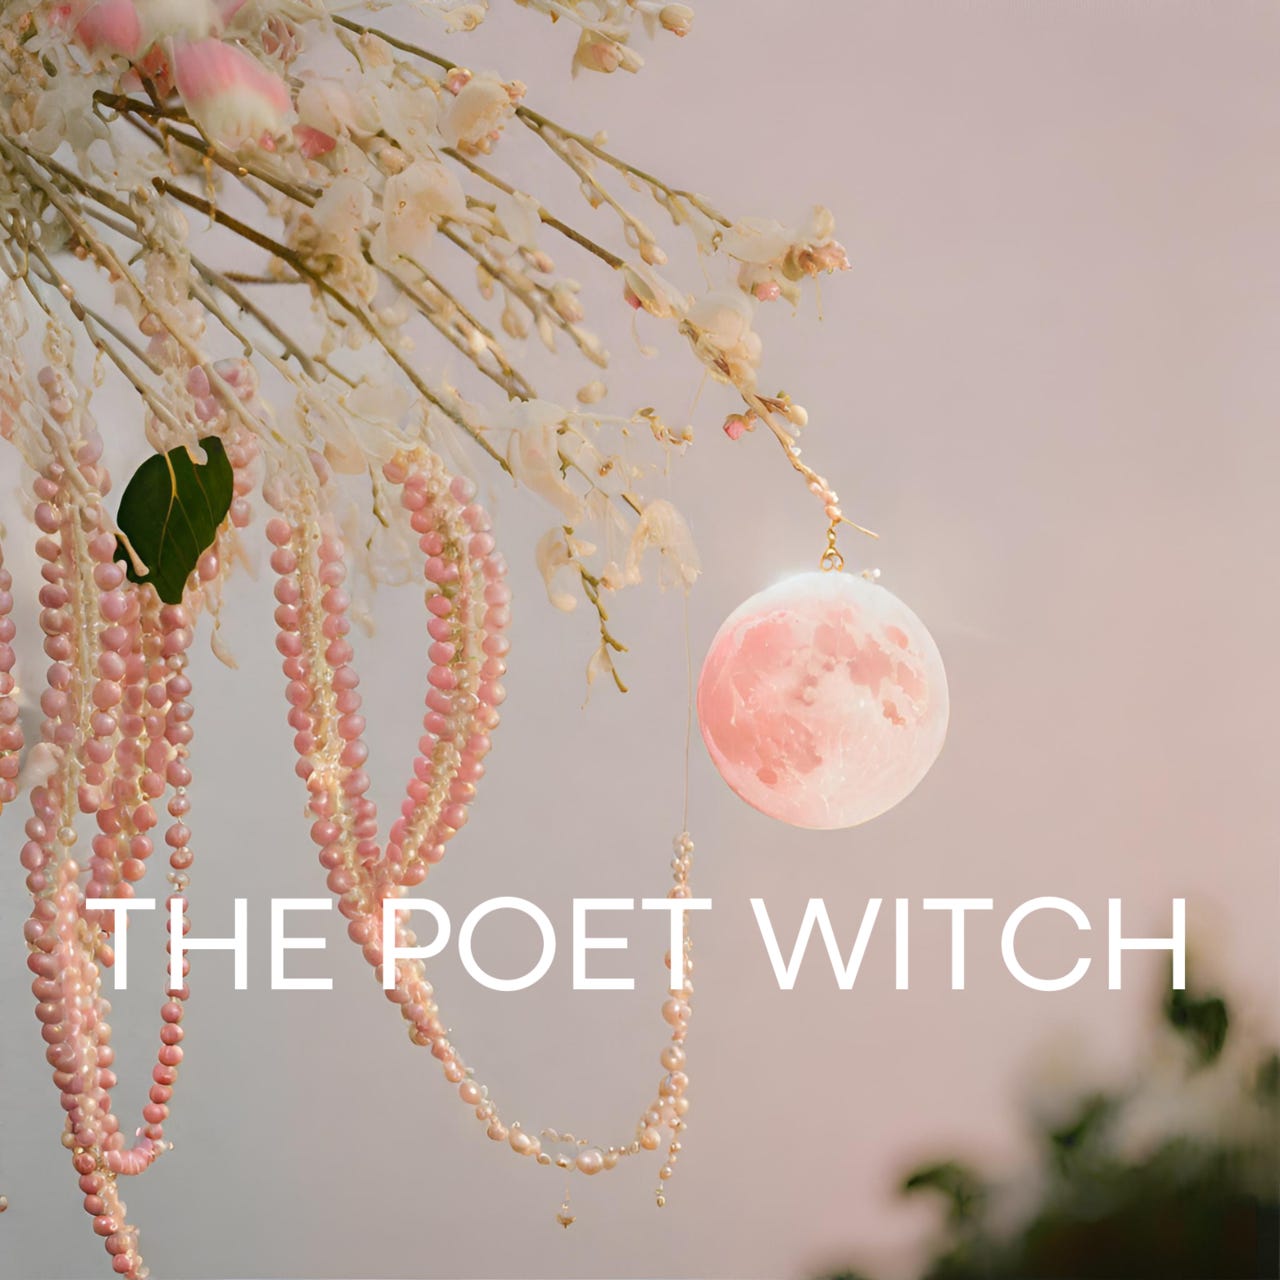 Artwork for The Poet Witch